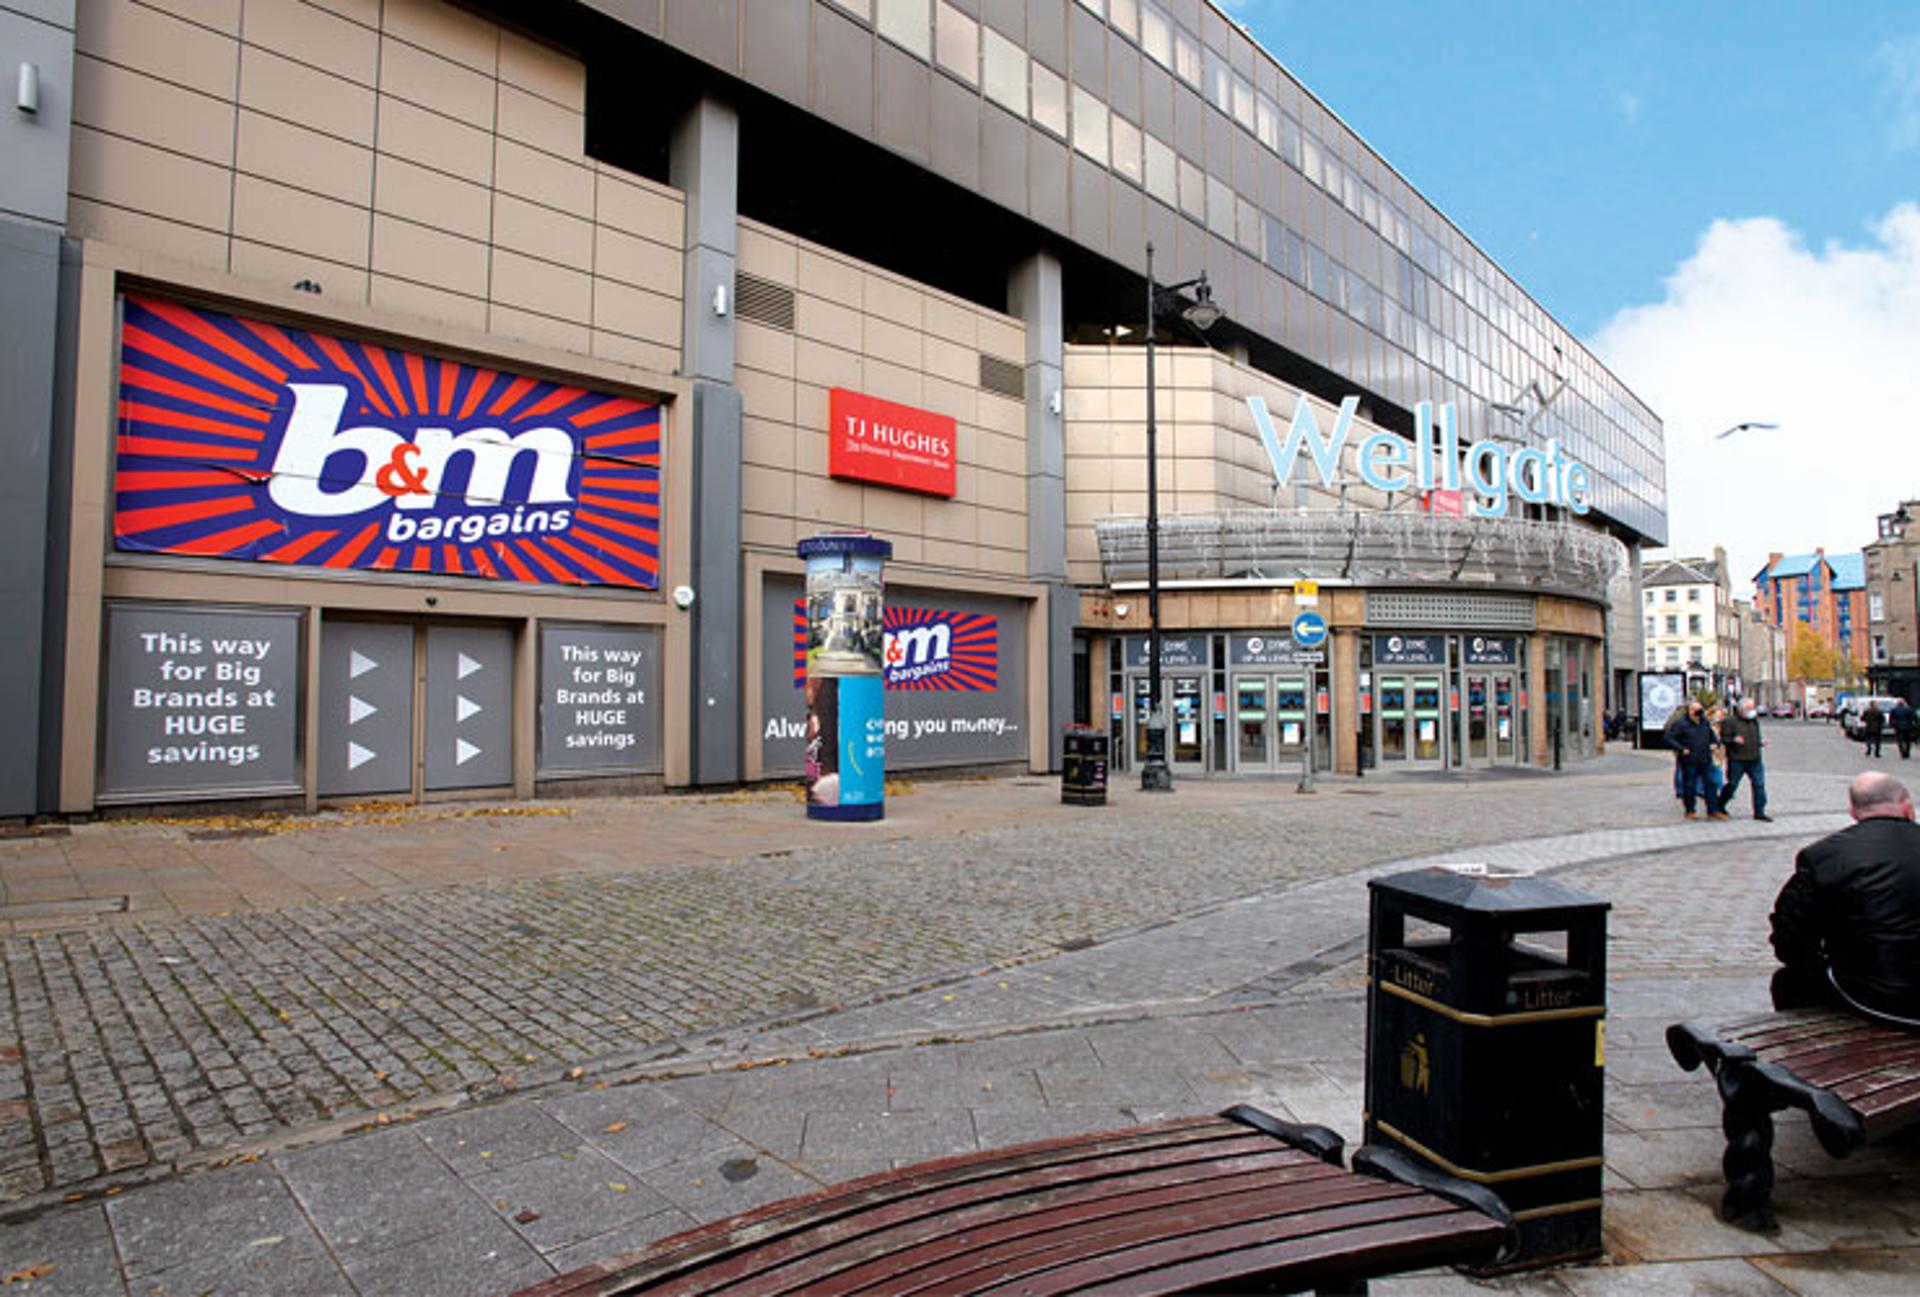 Dundee shopping centre up for sale in £500k auction